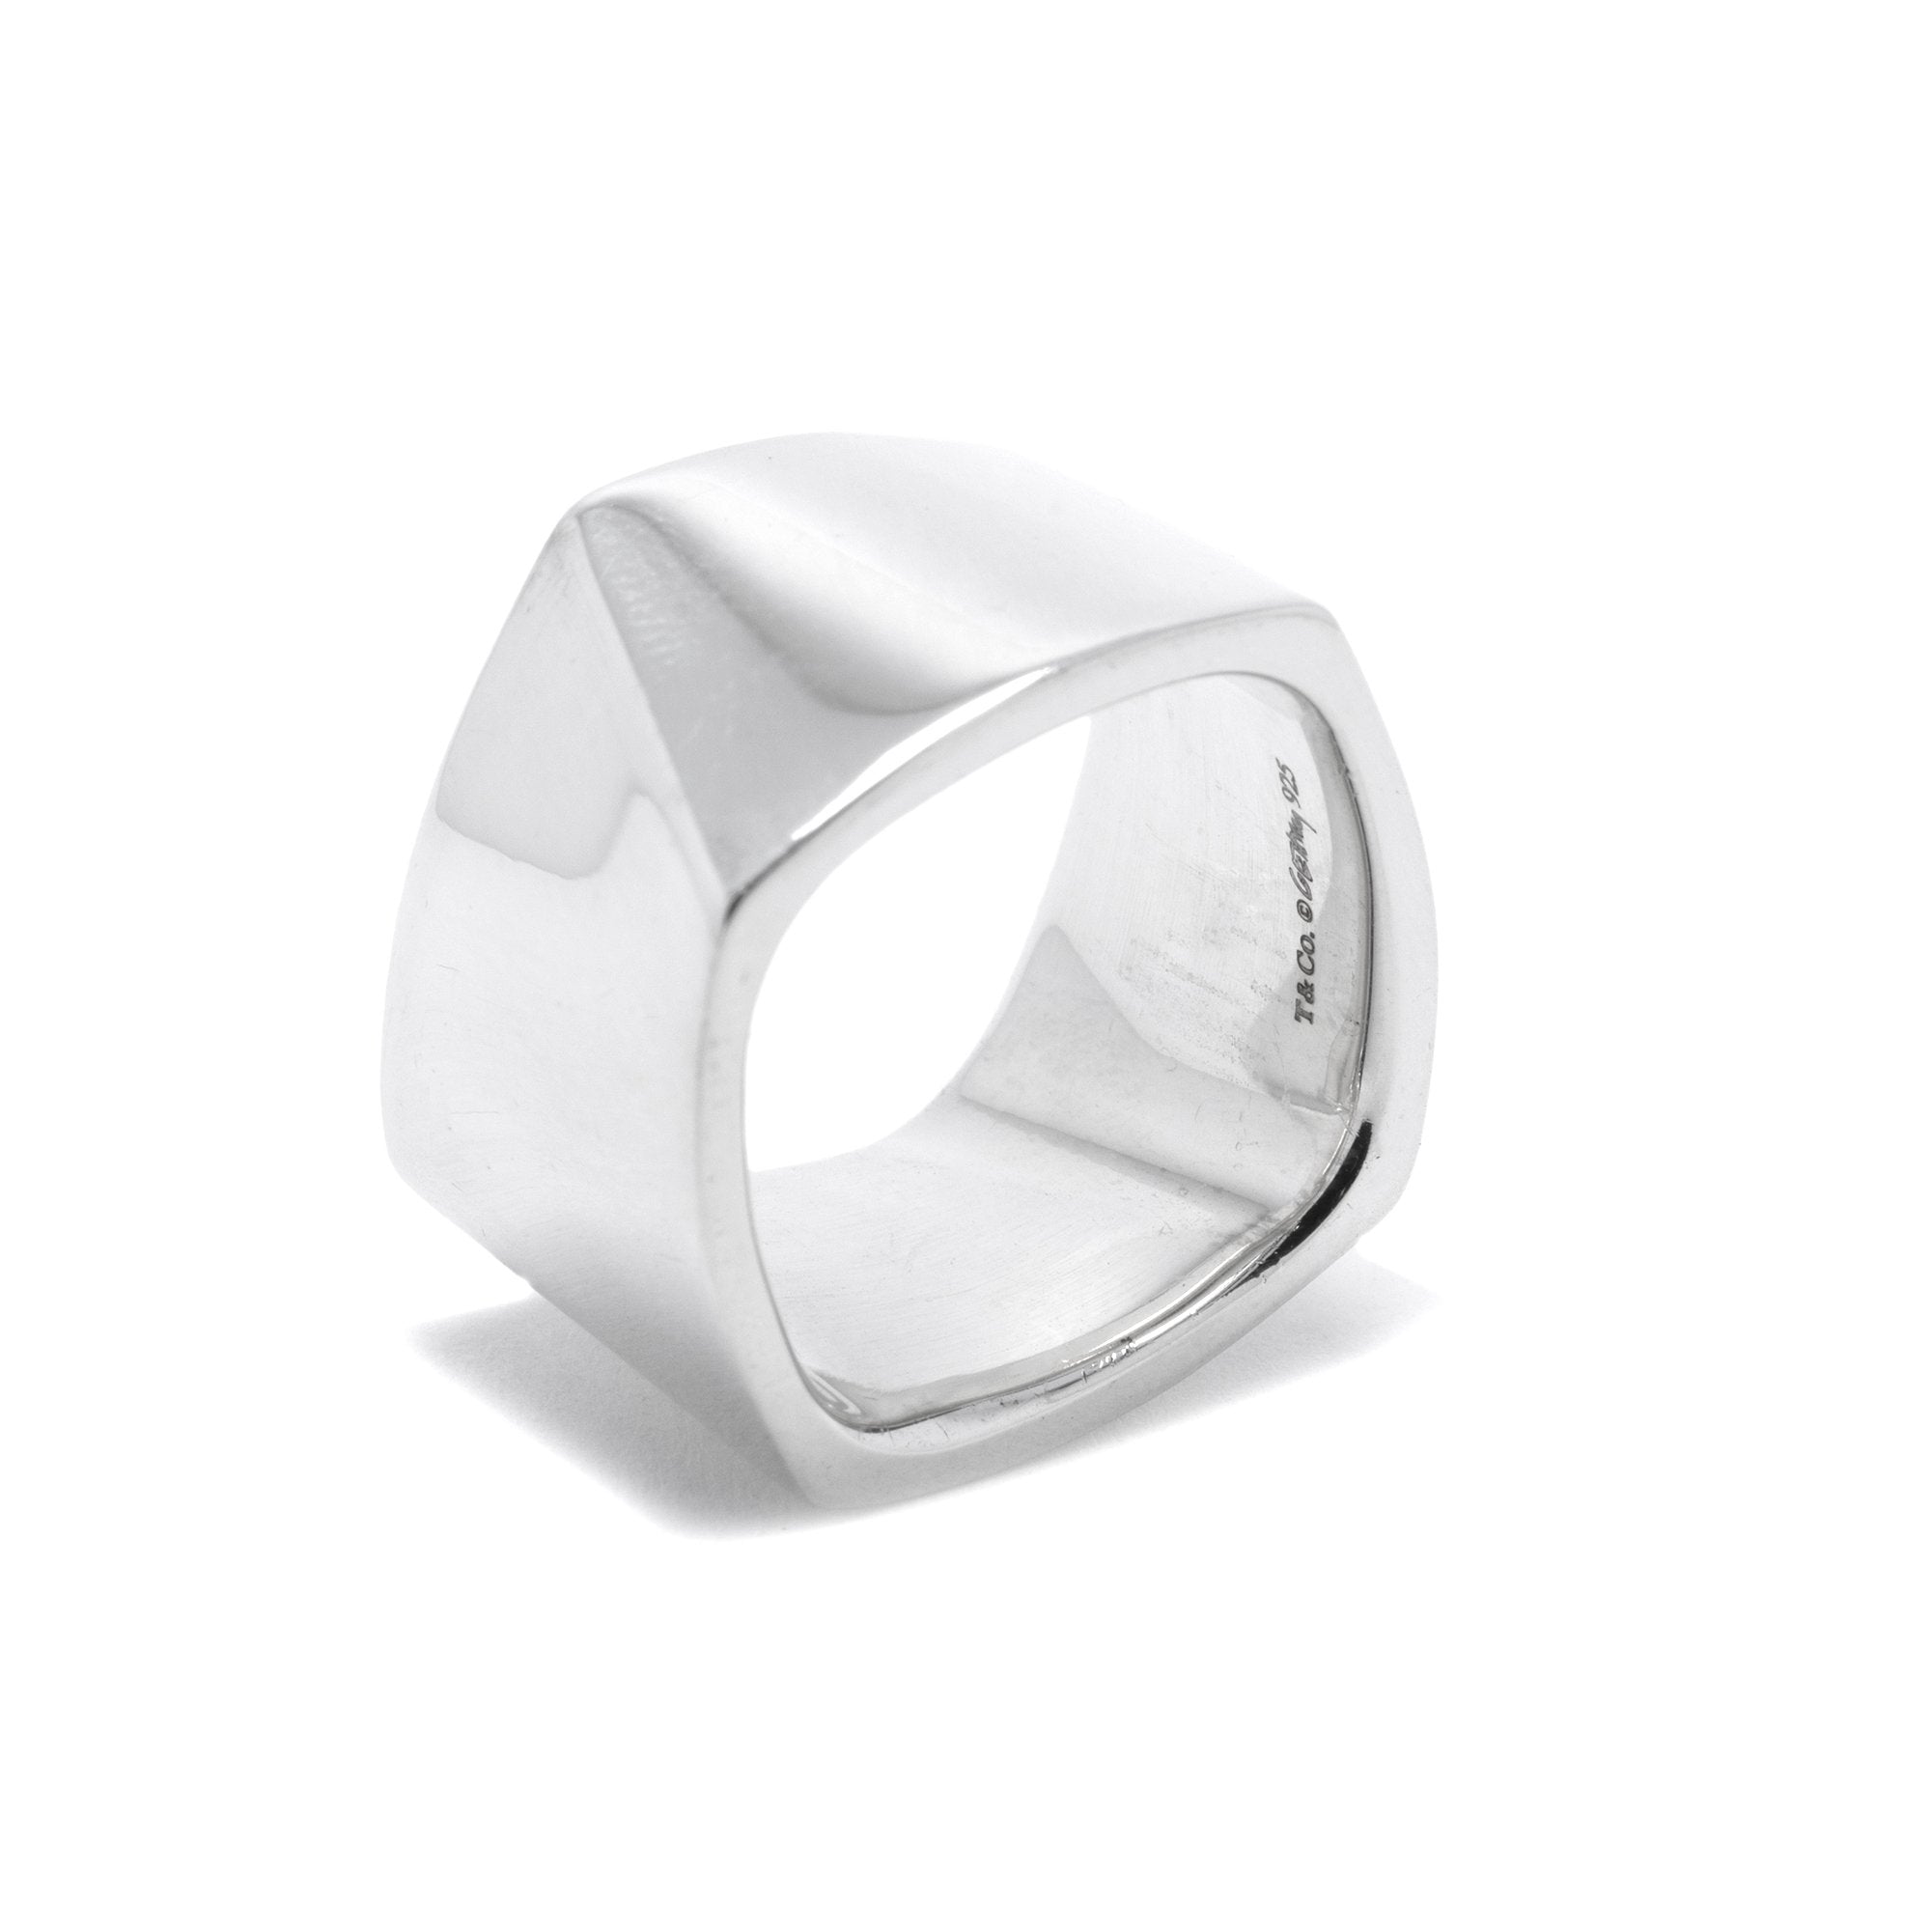 Tiffany & Co. Frank Gehry Torque Wide Ring – Oliver Jewellery